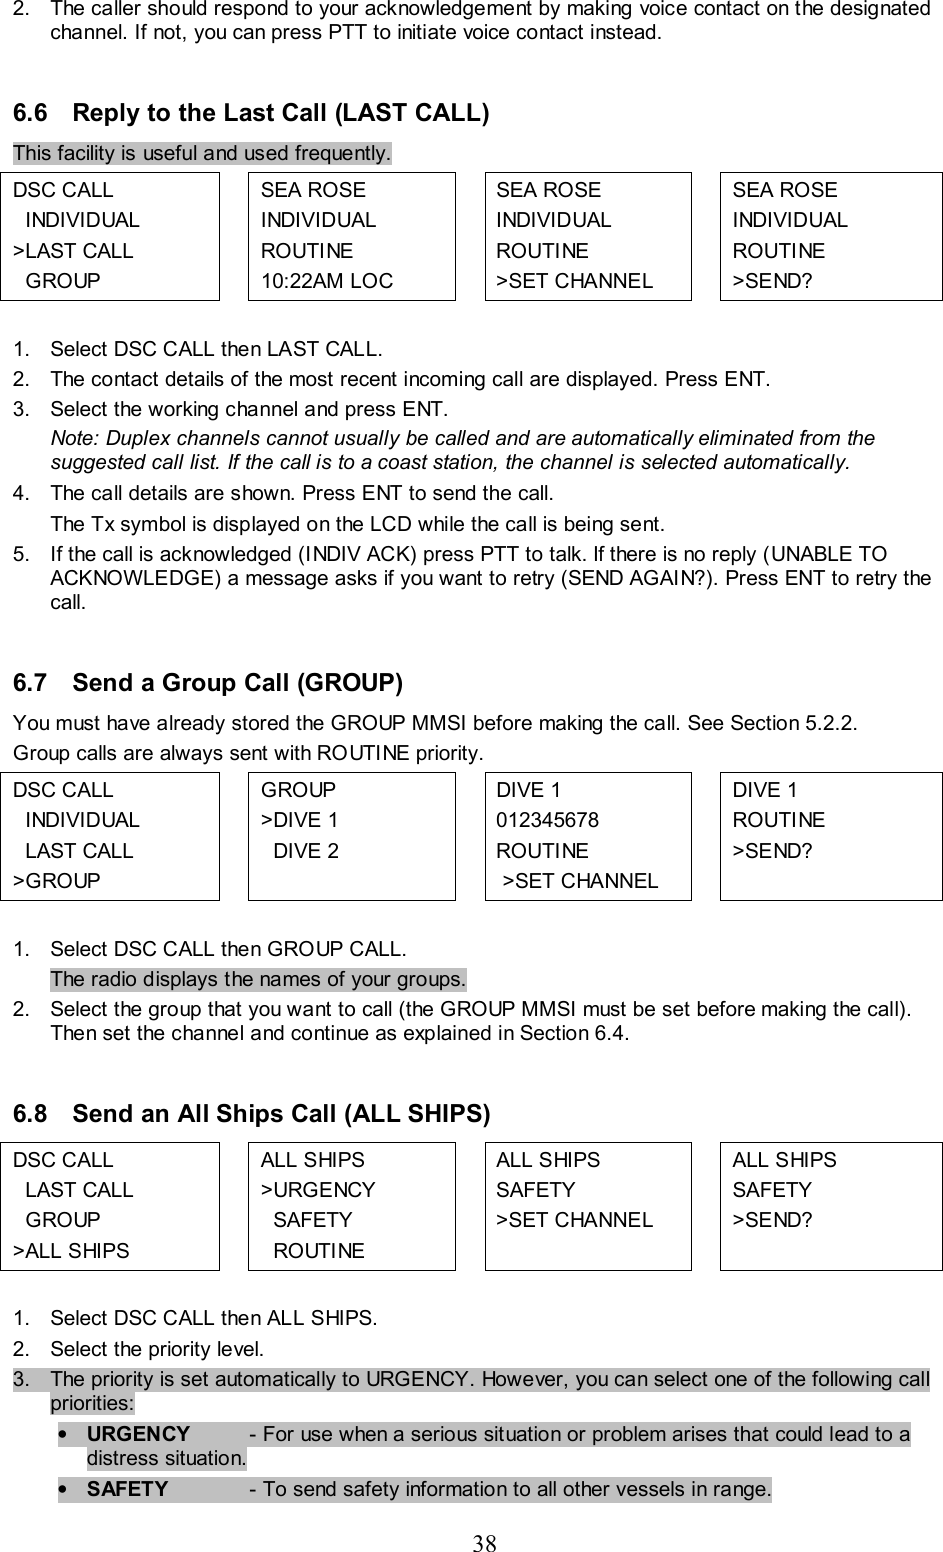 38 2.  The caller should respond to your acknowledgement by making voice contact on the designated channel. If not, you can press PTT to initiate voice contact instead.   6.6  Reply to the Last Call (LAST CALL) This facility is useful and used frequently. DSC CALL    INDIVIDUAL  &gt;LAST CALL    GROUP   SEA ROSE  INDIVIDUAL  ROUTINE  10:22AM LOC    SEA ROSE   INDIVIDUAL  ROUTINE  &gt;SET CHANNEL    SEA ROSE  INDIVIDUAL  ROUTINE  &gt;SEND?   1.  Select DSC CALL then LAST CALL.  2.  The contact details of the most recent incoming call are displayed. Press ENT. 3.  Select the working channel and press ENT.  Note: Duplex channels cannot usually be called and are automatically eliminated from the suggested call list. If the call is to a coast station, the channel is selected automatically.  4.  The call details are shown. Press ENT to send the call.  The Tx symbol is displayed on the LCD while the call is being sent.  5.  If the call is acknowledged (INDIV ACK) press PTT to talk. If there is no reply (UNABLE TO ACKNOWLEDGE) a message asks if you want to retry (SEND AGAIN?). Press ENT to retry the call.   6.7  Send a Group Call (GROUP)  You must have already stored the GROUP MMSI before making the call. See Section 5.2.2. Group calls are always sent with ROUTINE priority. DSC CALL    INDIVIDUAL    LAST CALL  &gt;GROUP  GROUP  &gt;DIVE 1   DIVE 2  DIVE 1 012345678 ROUTINE  &gt;SET CHANNEL  DIVE 1 ROUTINE &gt;SEND?    1.  Select DSC CALL then GROUP CALL.  The radio displays the names of your groups.  2.  Select the group that you want to call (the GROUP MMSI must be set before making the call). Then set the channel and continue as explained in Section 6.4.  6.8  Send an All Ships Call (ALL SHIPS) DSC CALL     LAST CALL    GROUP &gt;ALL SHIPS  ALL SHIPS &gt;URGENCY   SAFETY   ROUTINE  ALL SHIPS SAFETY &gt;SET CHANNEL     ALL SHIPS SAFETY &gt;SEND?    1.  Select DSC CALL then ALL SHIPS.  2.  Select the priority level. 3.  The priority is set automatically to URGENCY. However, you can select one of the following call  priorities: • URGENCY   - For use when a serious situation or problem arises that could lead to a distress situation.  • SAFETY   - To send safety information to all other vessels in range. 